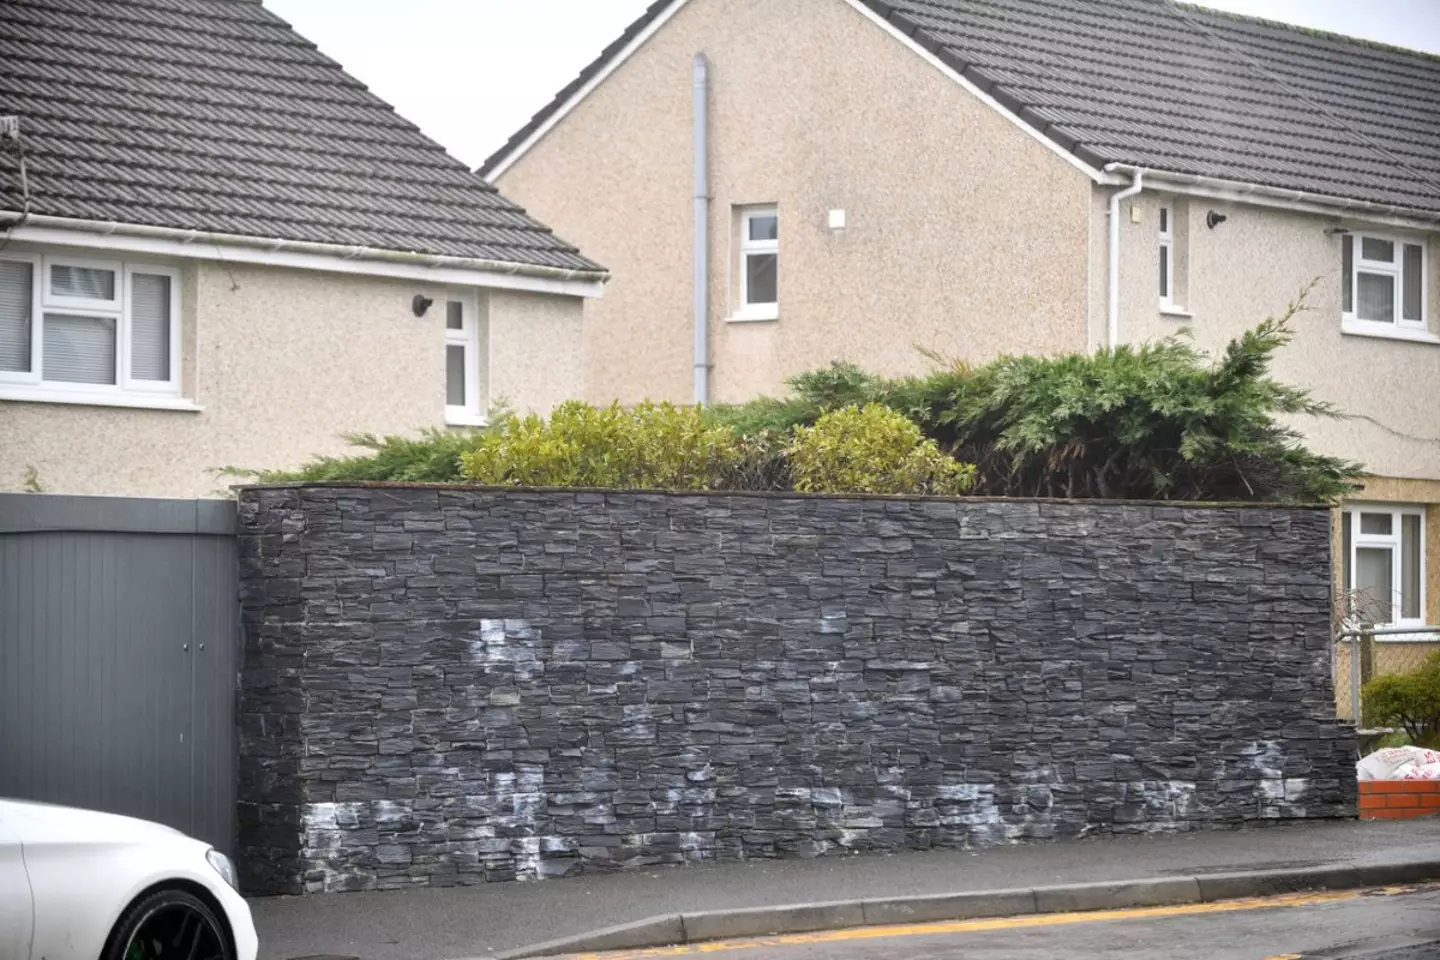 The local council said it received a complaint about the wall.